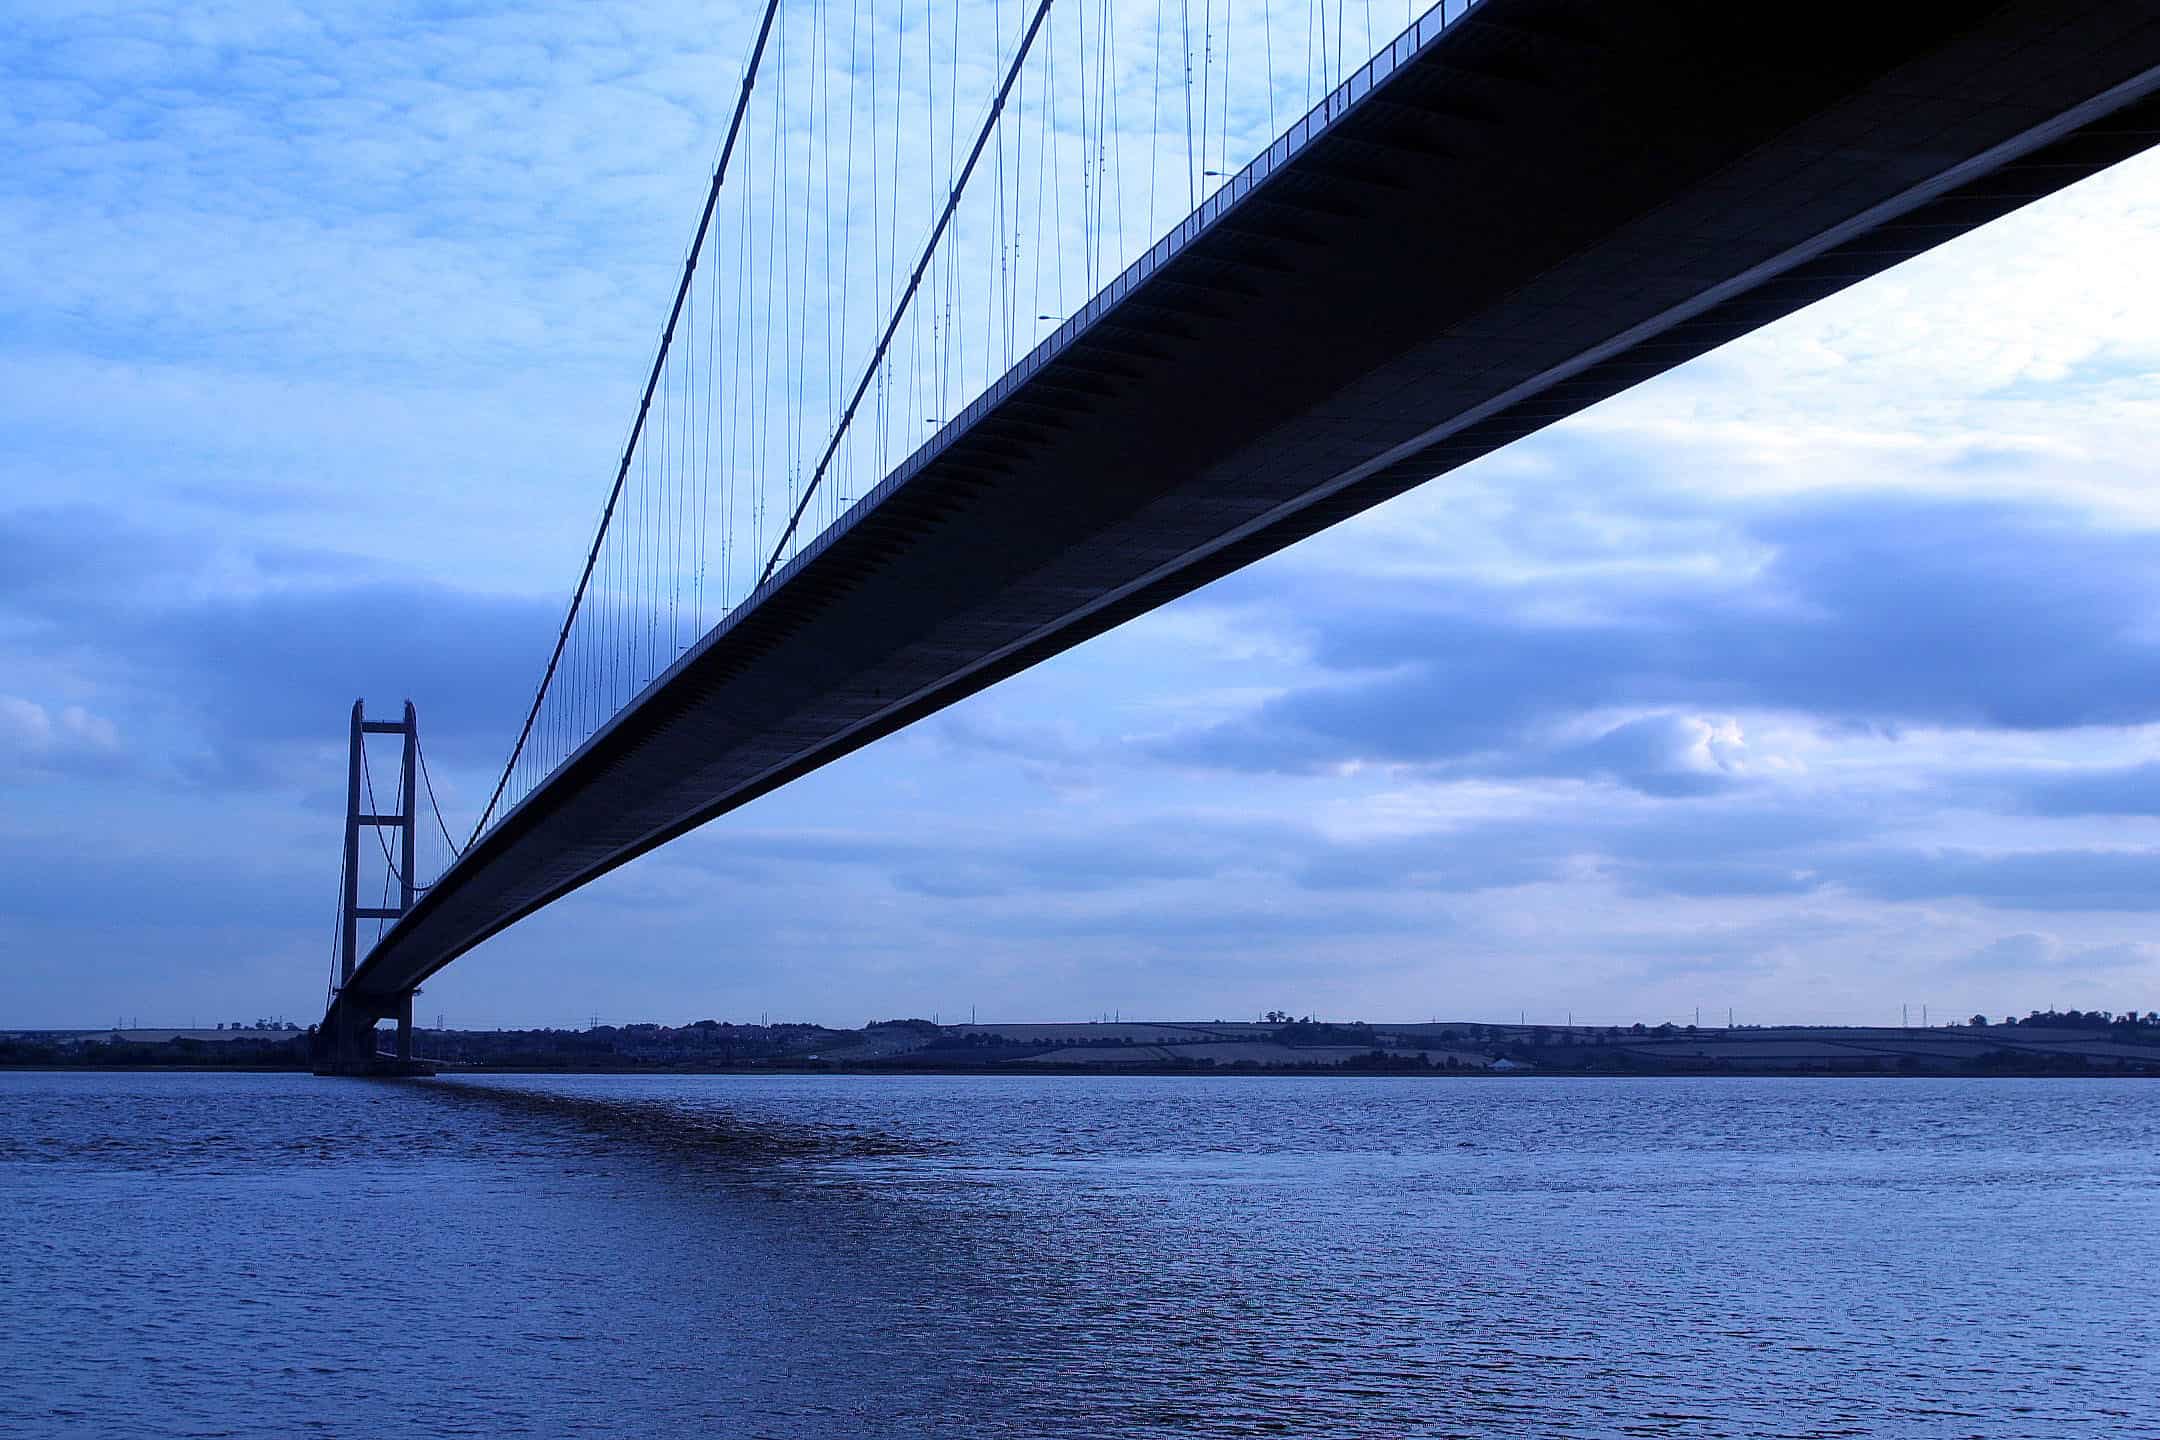 An image of the Humber Bridge, taken at sunrise from below the bridge on the Hull side of the estuary. The fields behind the South Bank can be seen in the distance, on the other side of the water.